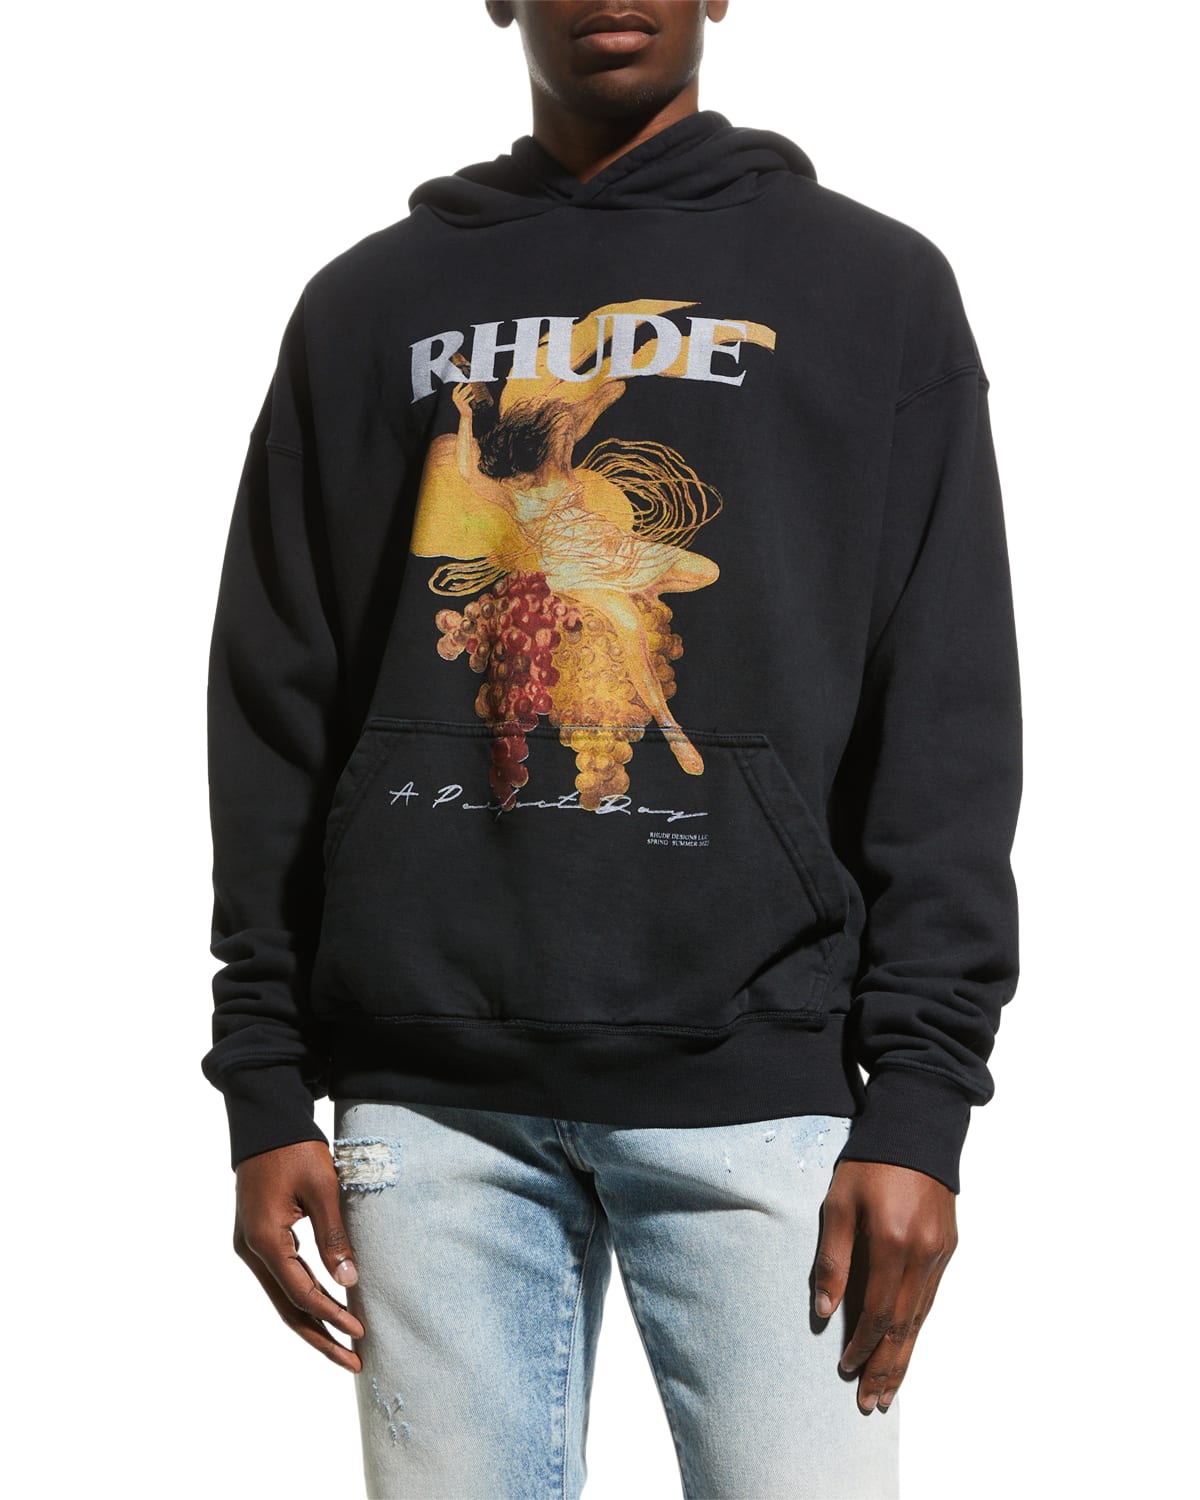 Rhude Men's A Perfect Day Graphic Hoodie